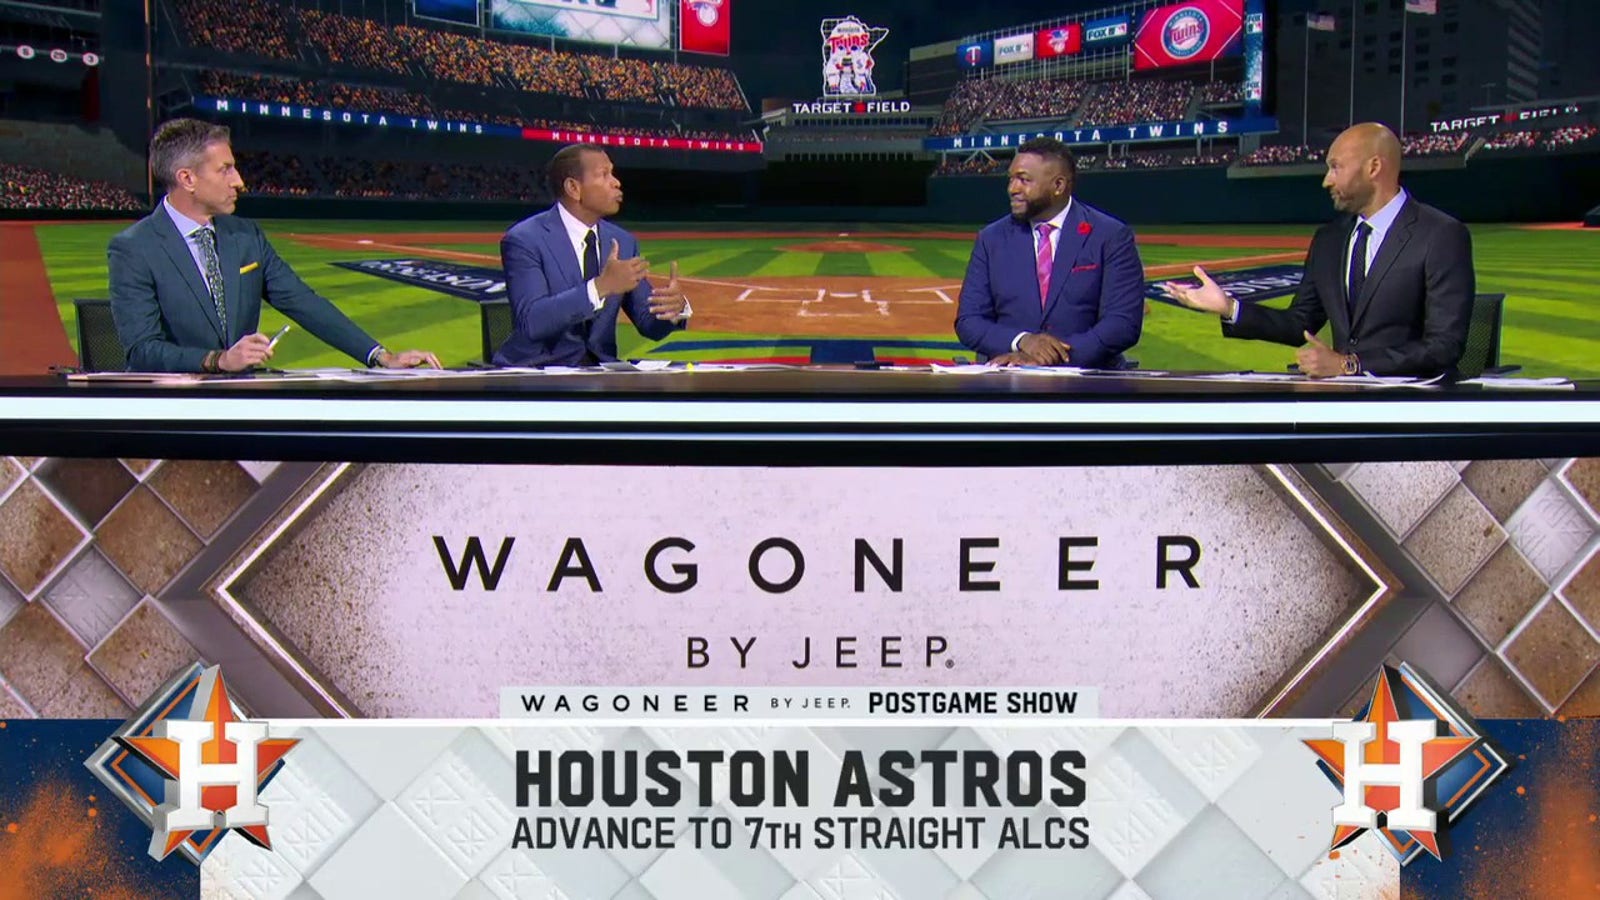 'MLB on FOX' crew react to Astros facing the Rangers in the ALCS